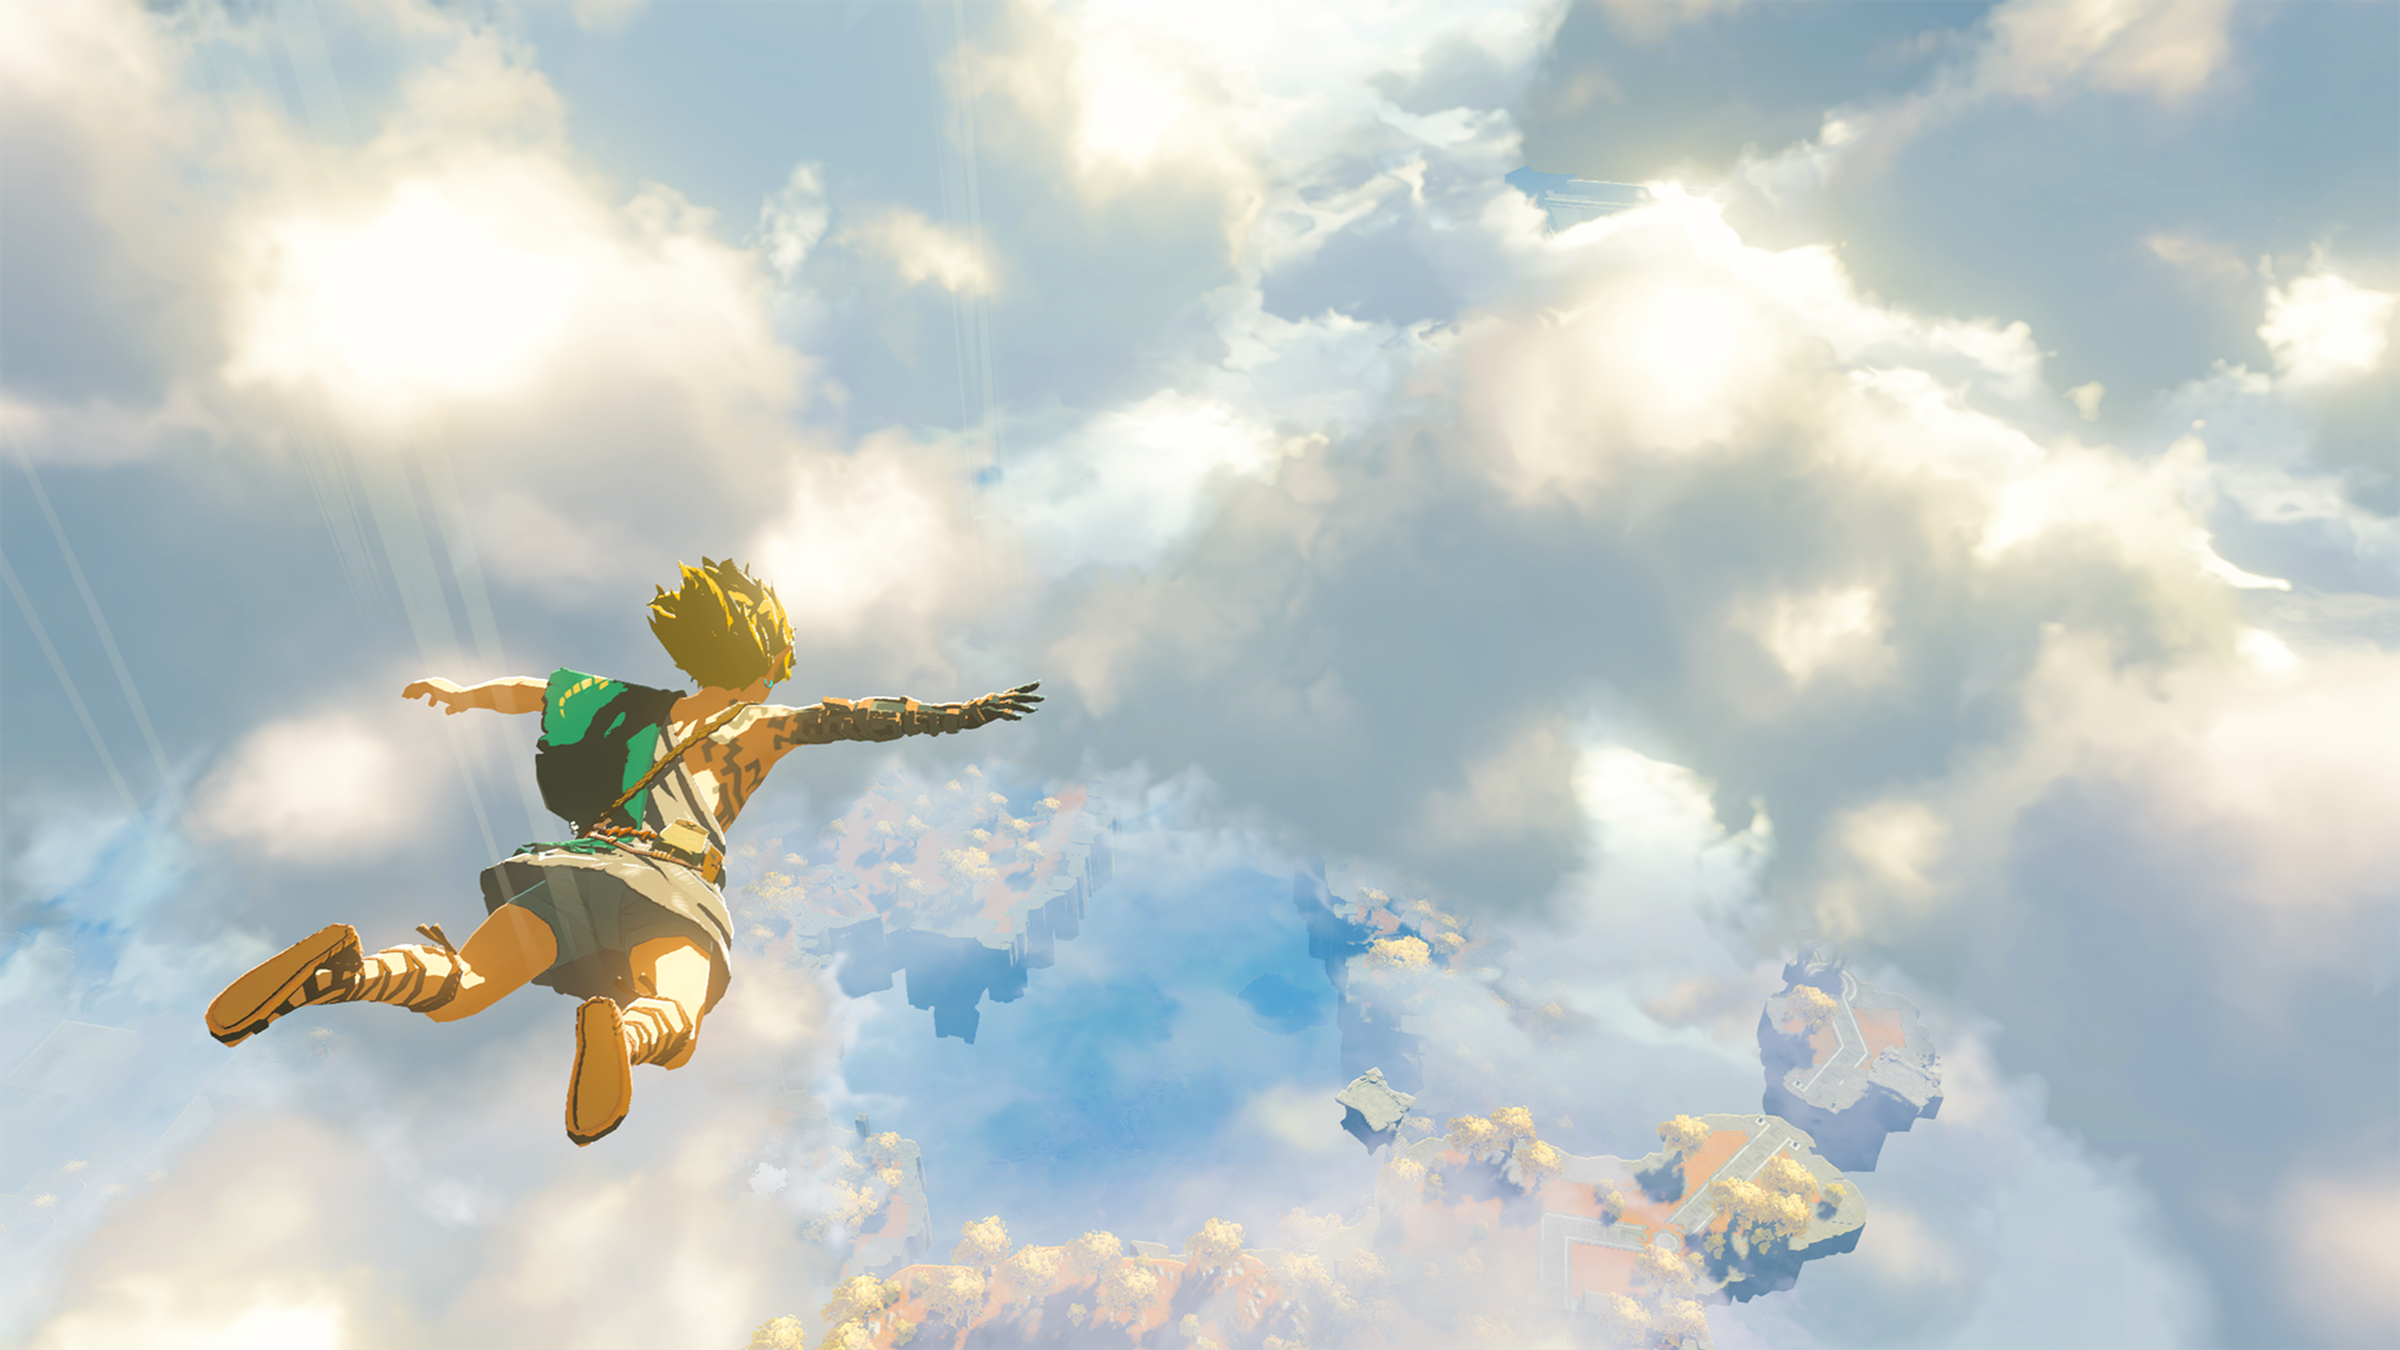 Screenshot from Tears of the Kingdom featuring Link in free fall descending from the Sky Islands to Hyrule below.